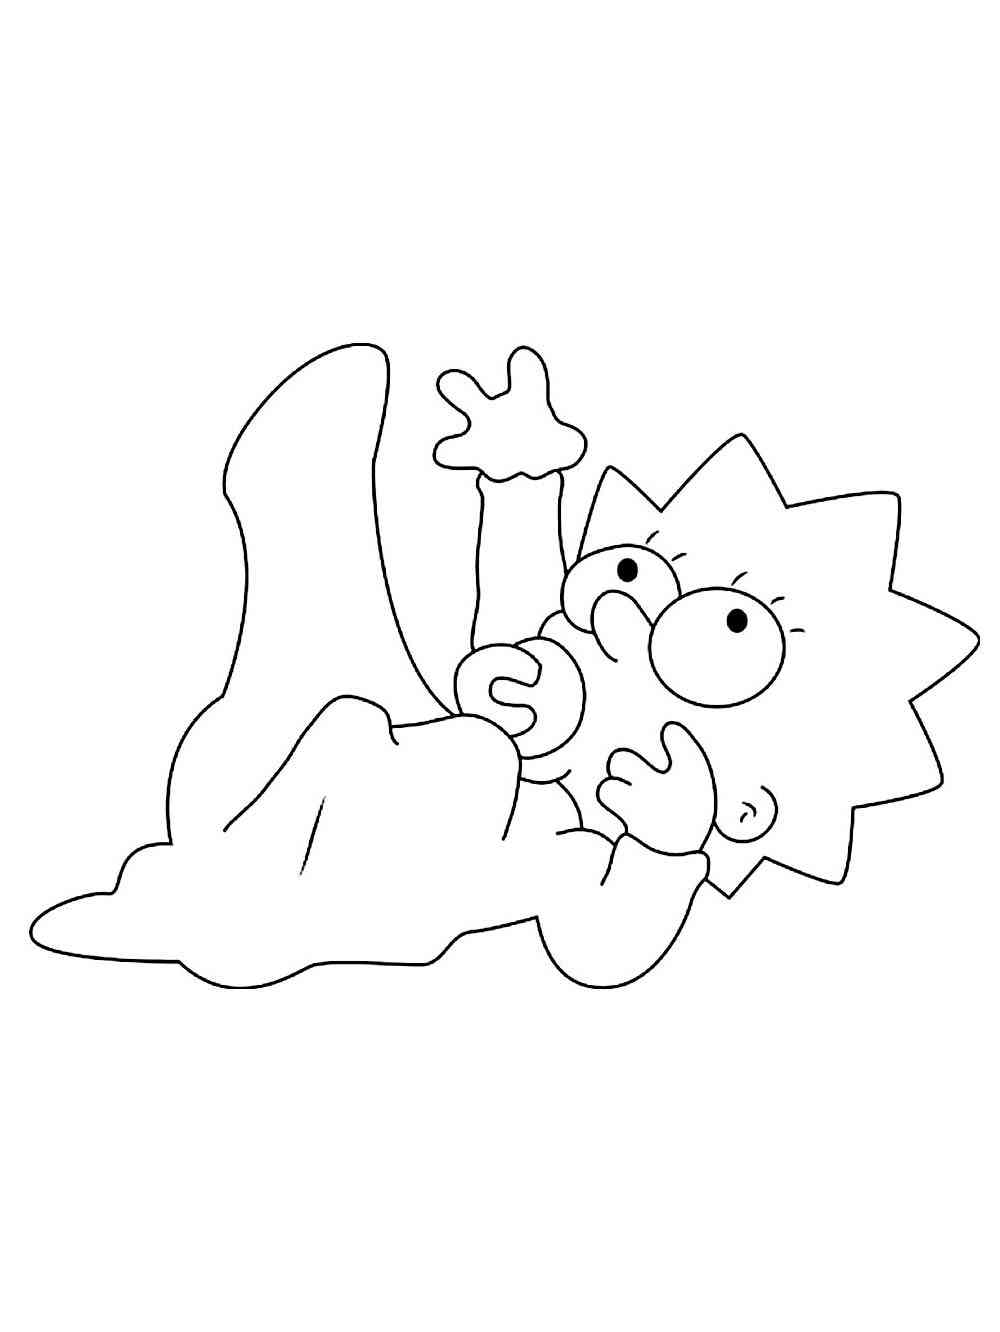 Maggie simpson coloring pages